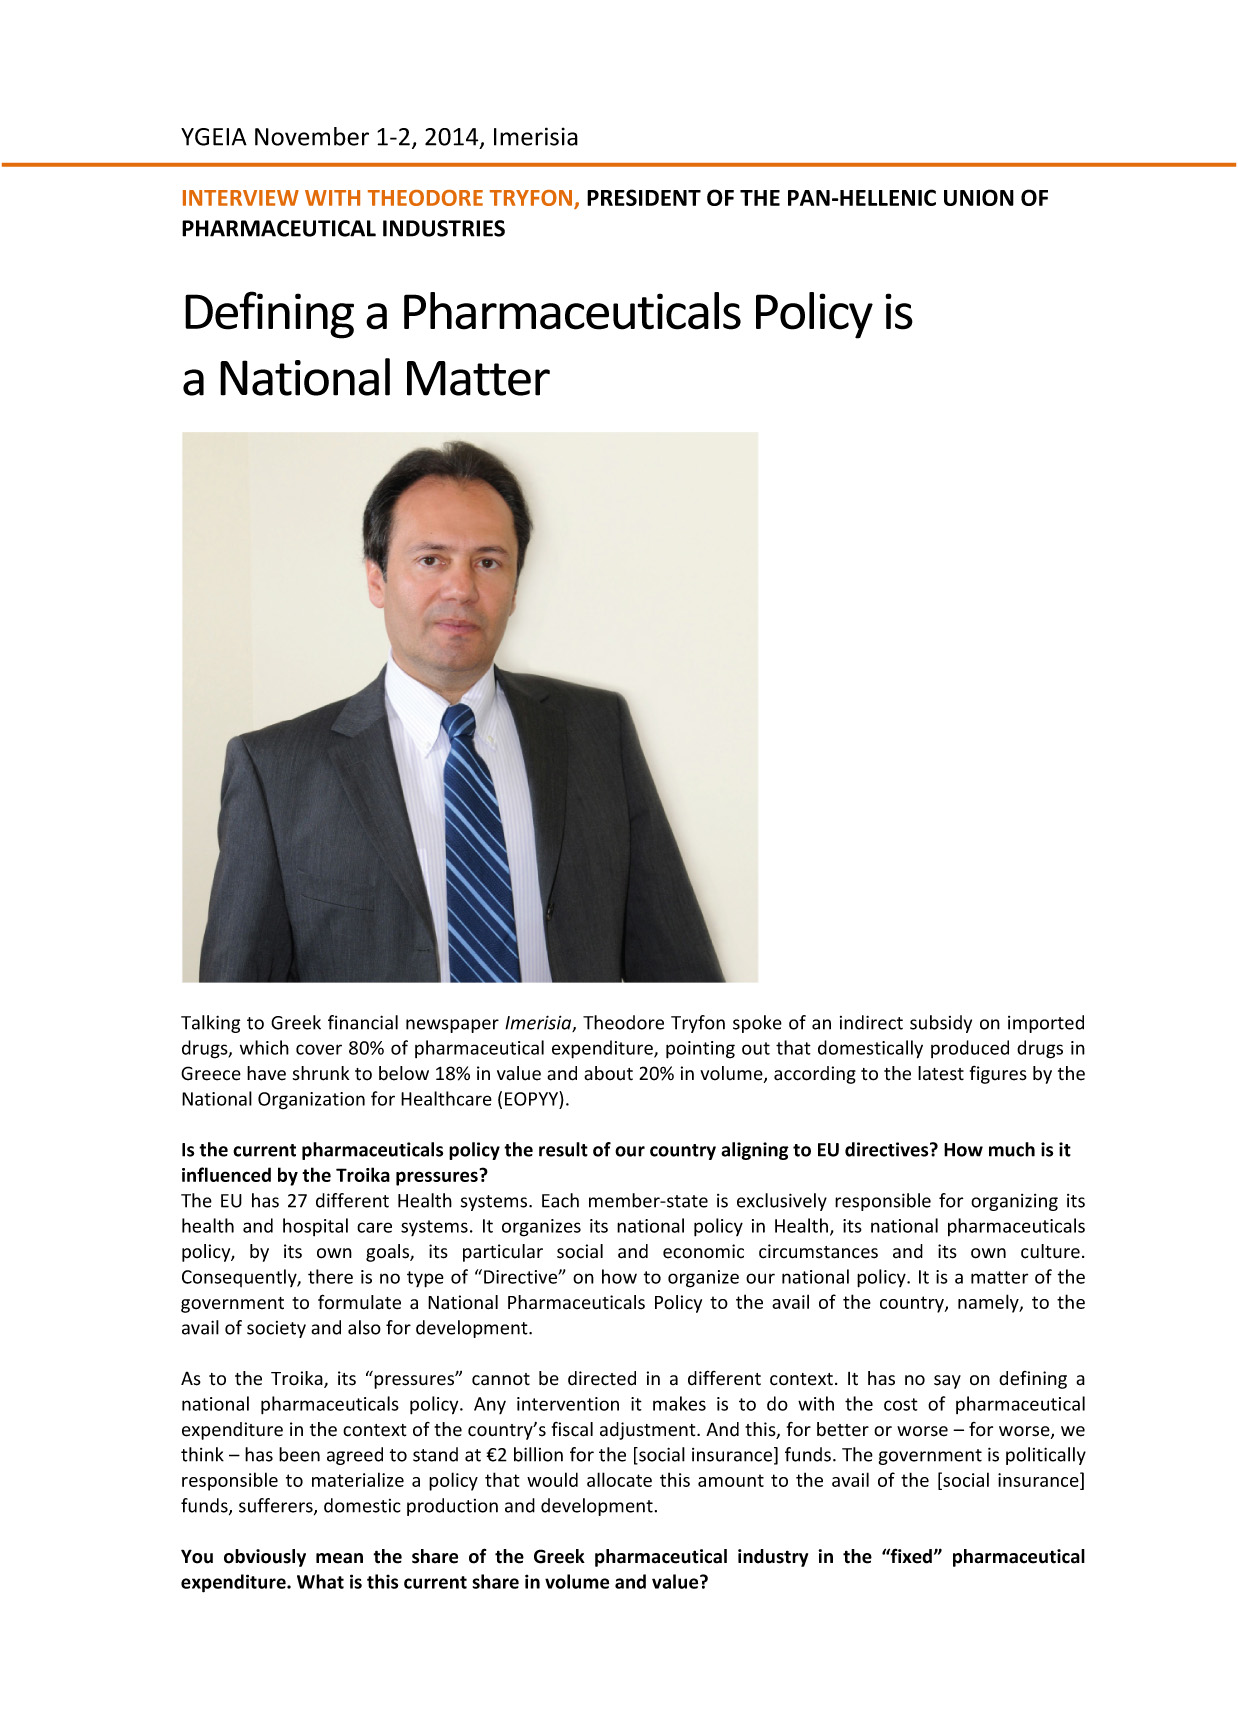 Imerisia Interview with Theodore Tryfon, President of the Panhellenic Union of Pharmaceutical Industries (PEF) Defining a Pharmaceuticals Policy is a National Matter